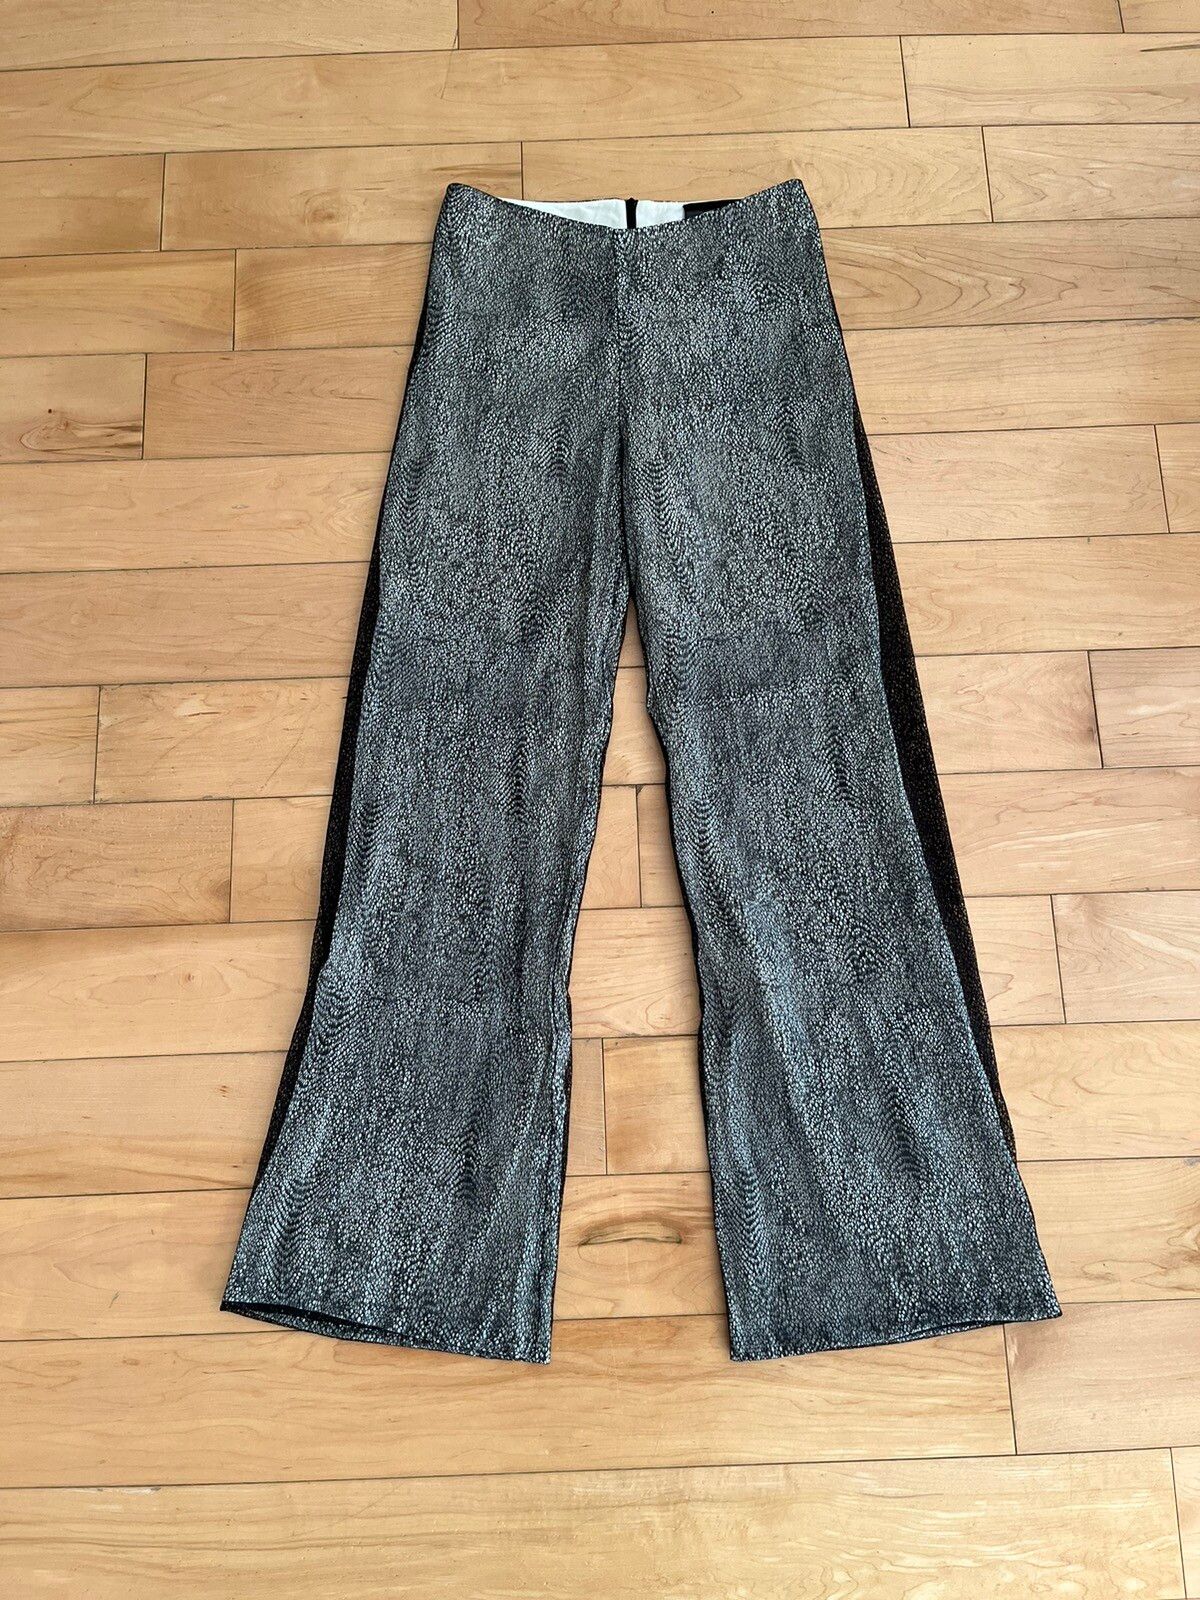 Other - NWT - Extremely Rare S/S15 Iris Van Herpen Pants - 1